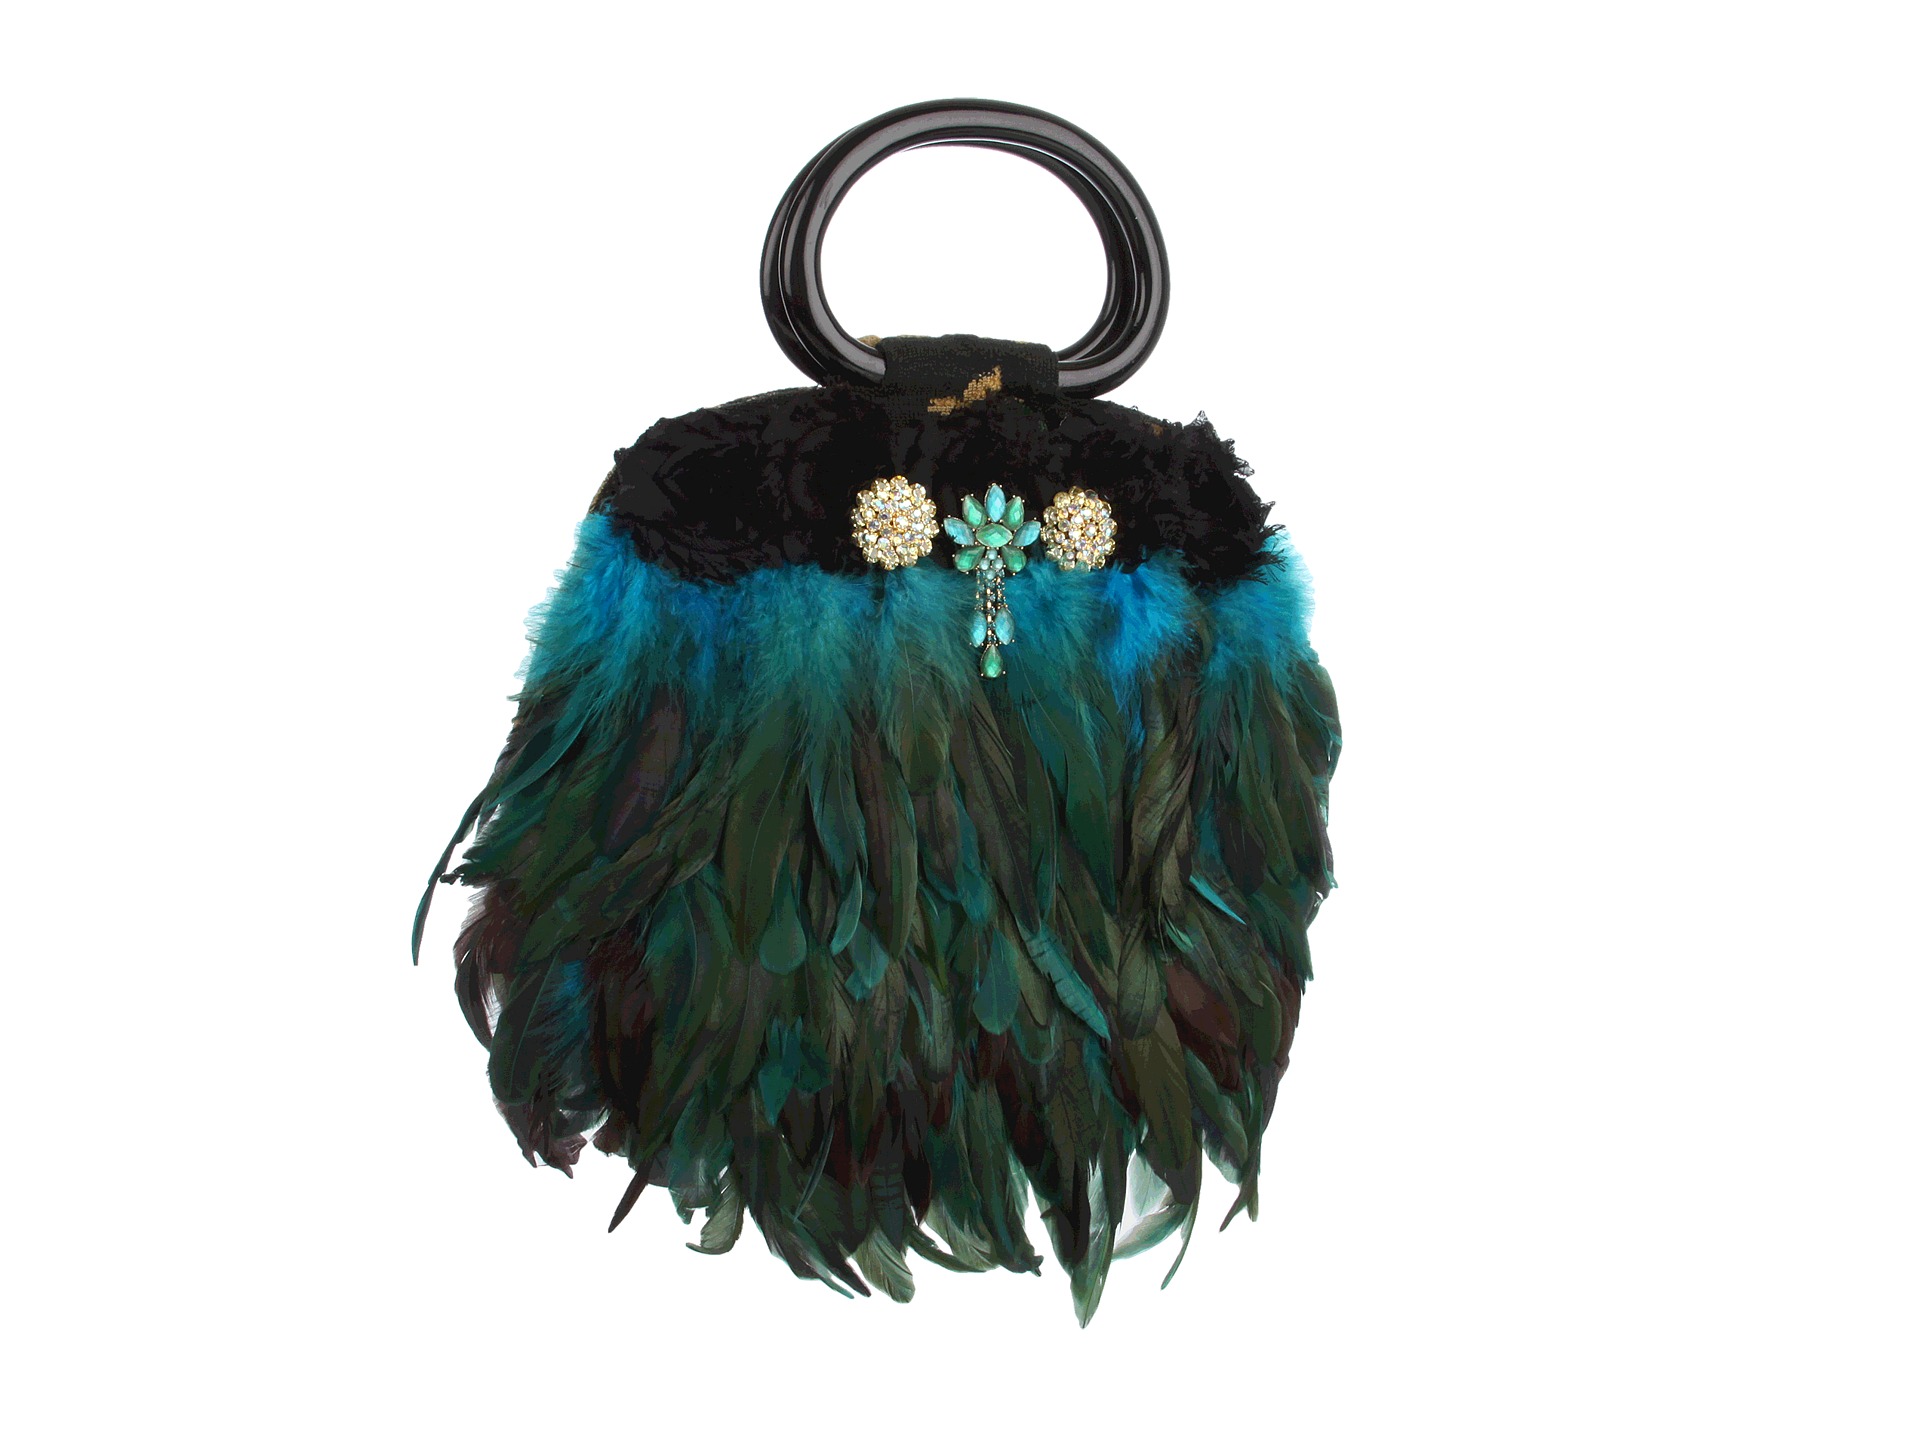 Inspired by Claire Jane   Peacock Feather Purse